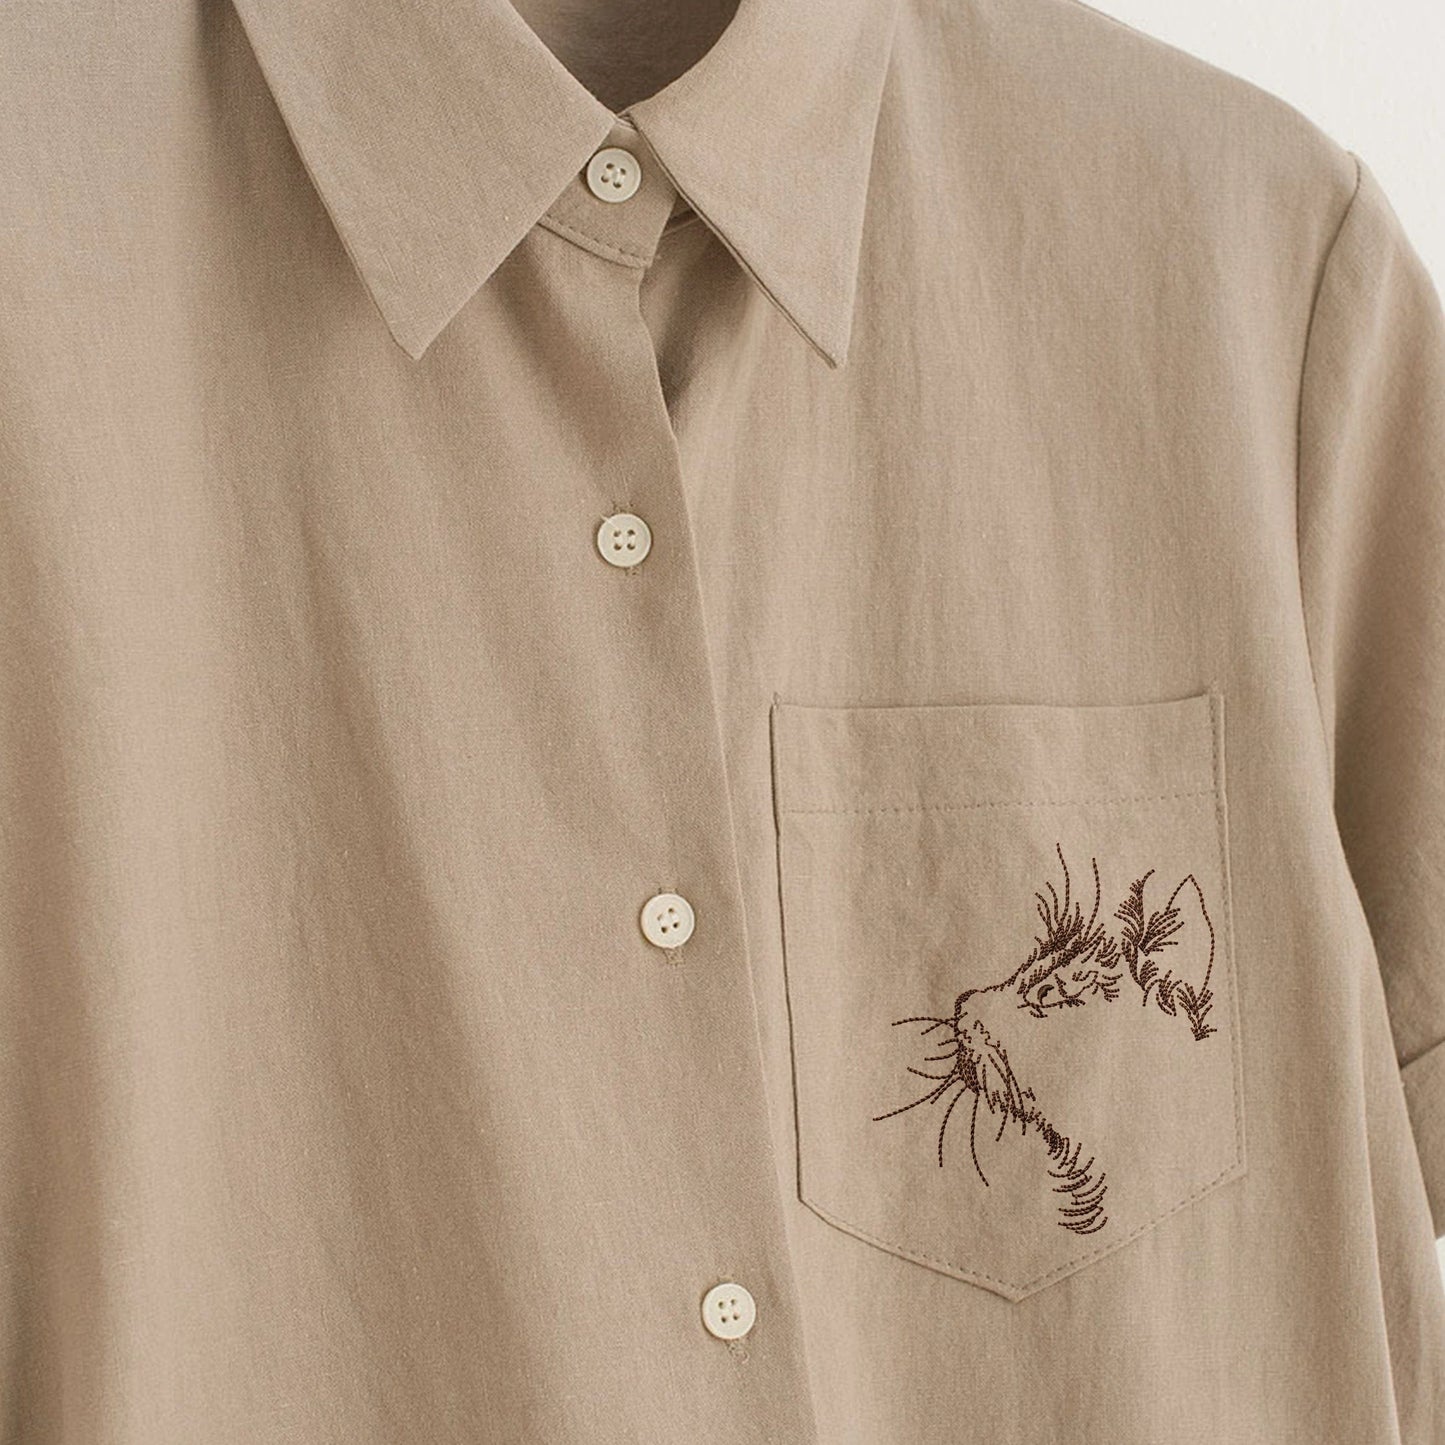 Cat Machine Embroidery Design on blouse pocket